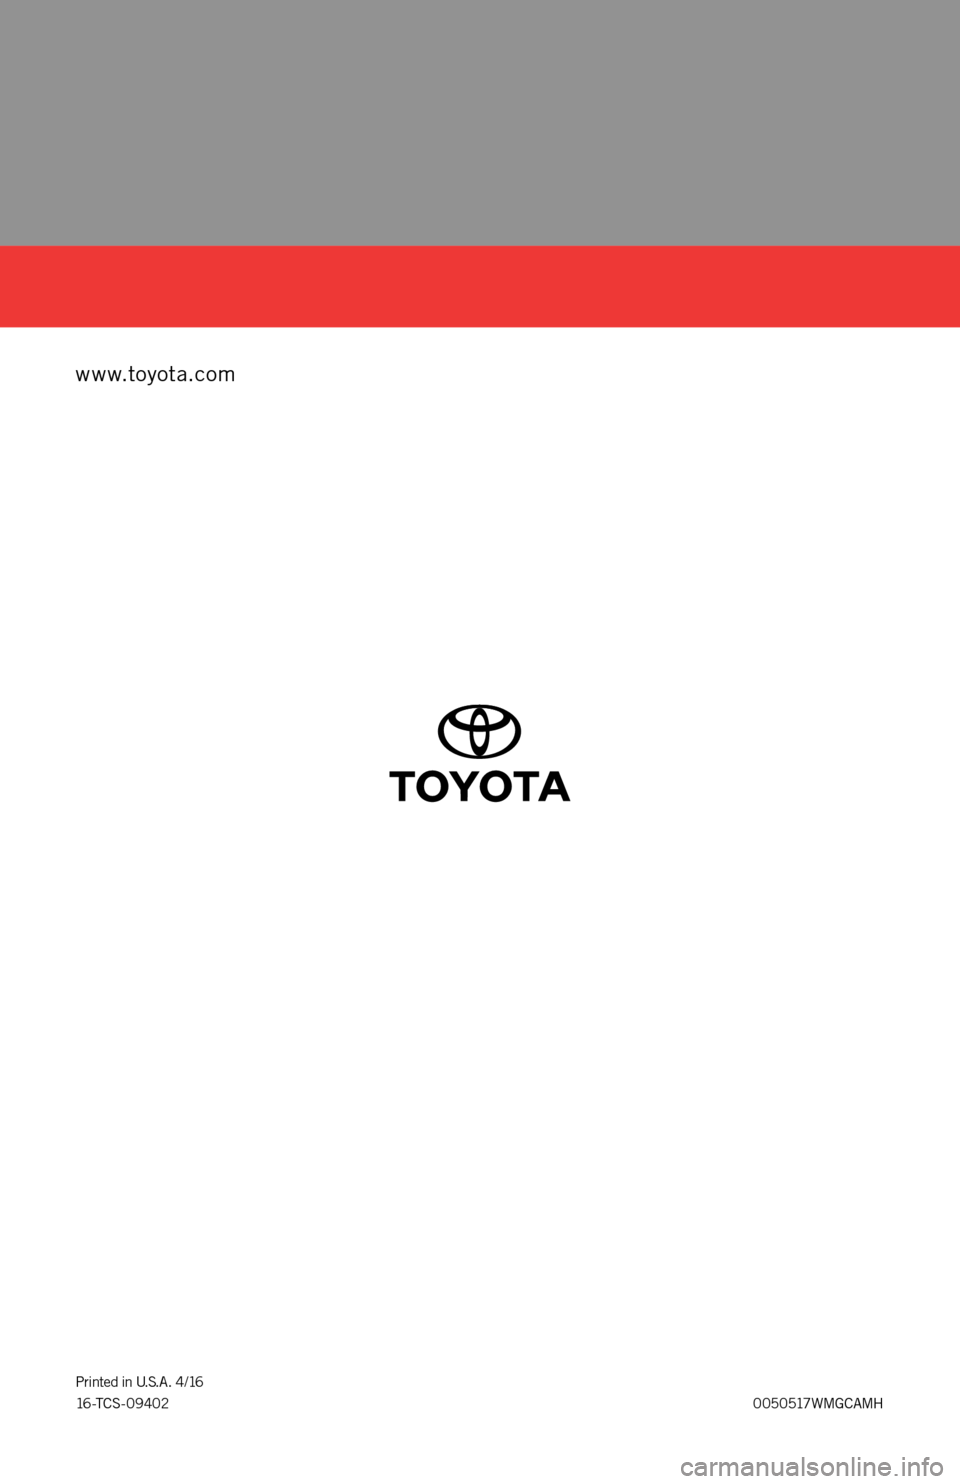 TOYOTA CAMRY HYBRID 2017 XV50 / 9.G Warranty And Maintenance Guide www.toyota.com
0050517WMGCAMH Printed in U.S.A. 4/16
16 -T C S - 0 9 4 0 2 